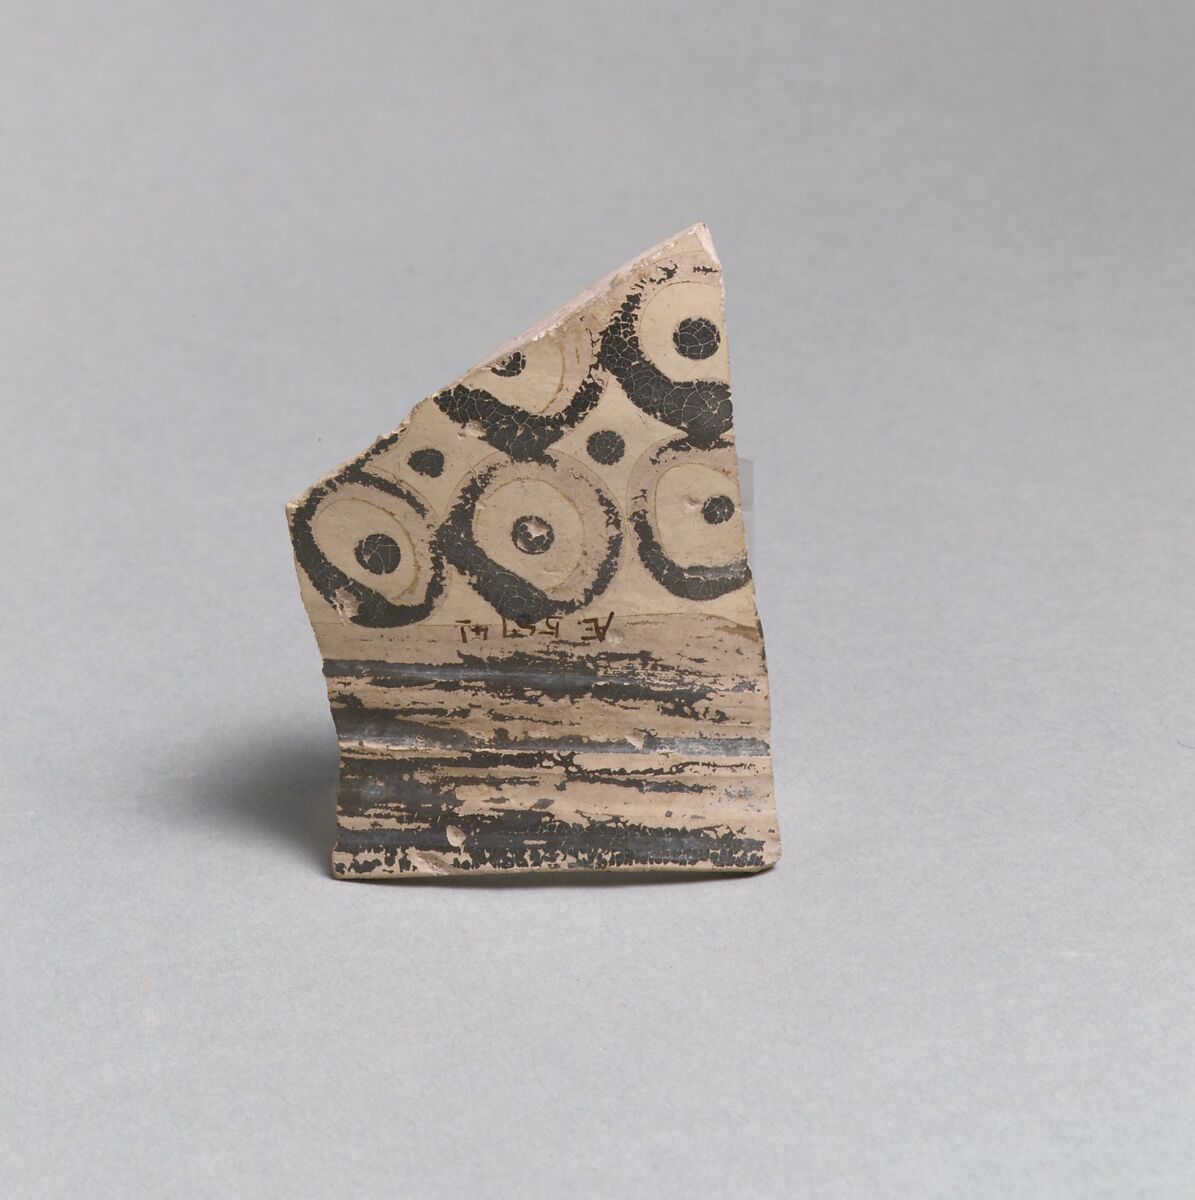 Terracotta rim from a vase with bands and dots in circles, Terracotta, Minoan 